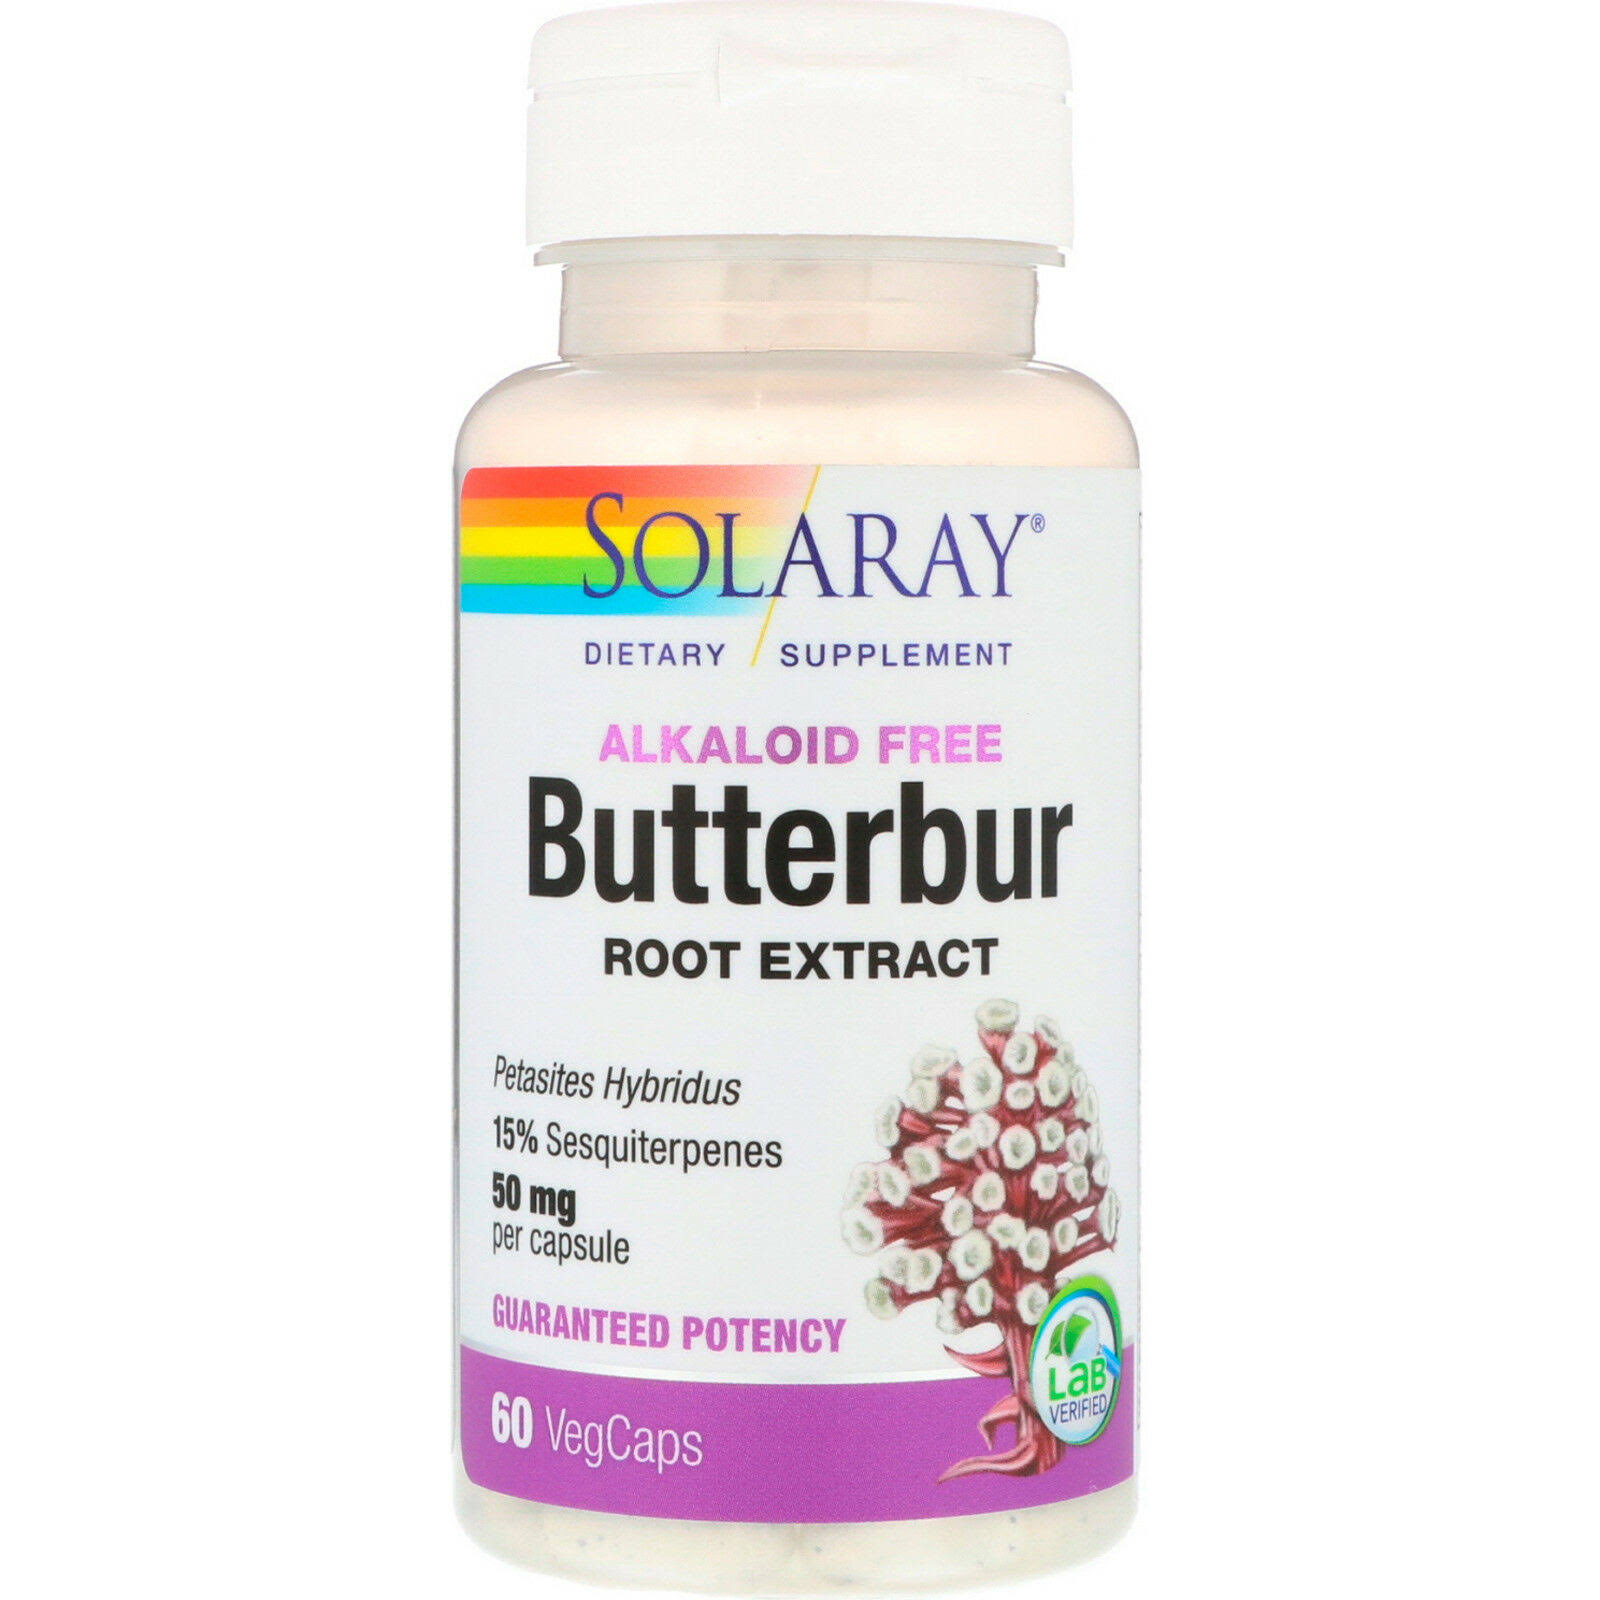 Solaray Butterbur Extract 50Mg Dietary Supplement - 60 Capsules